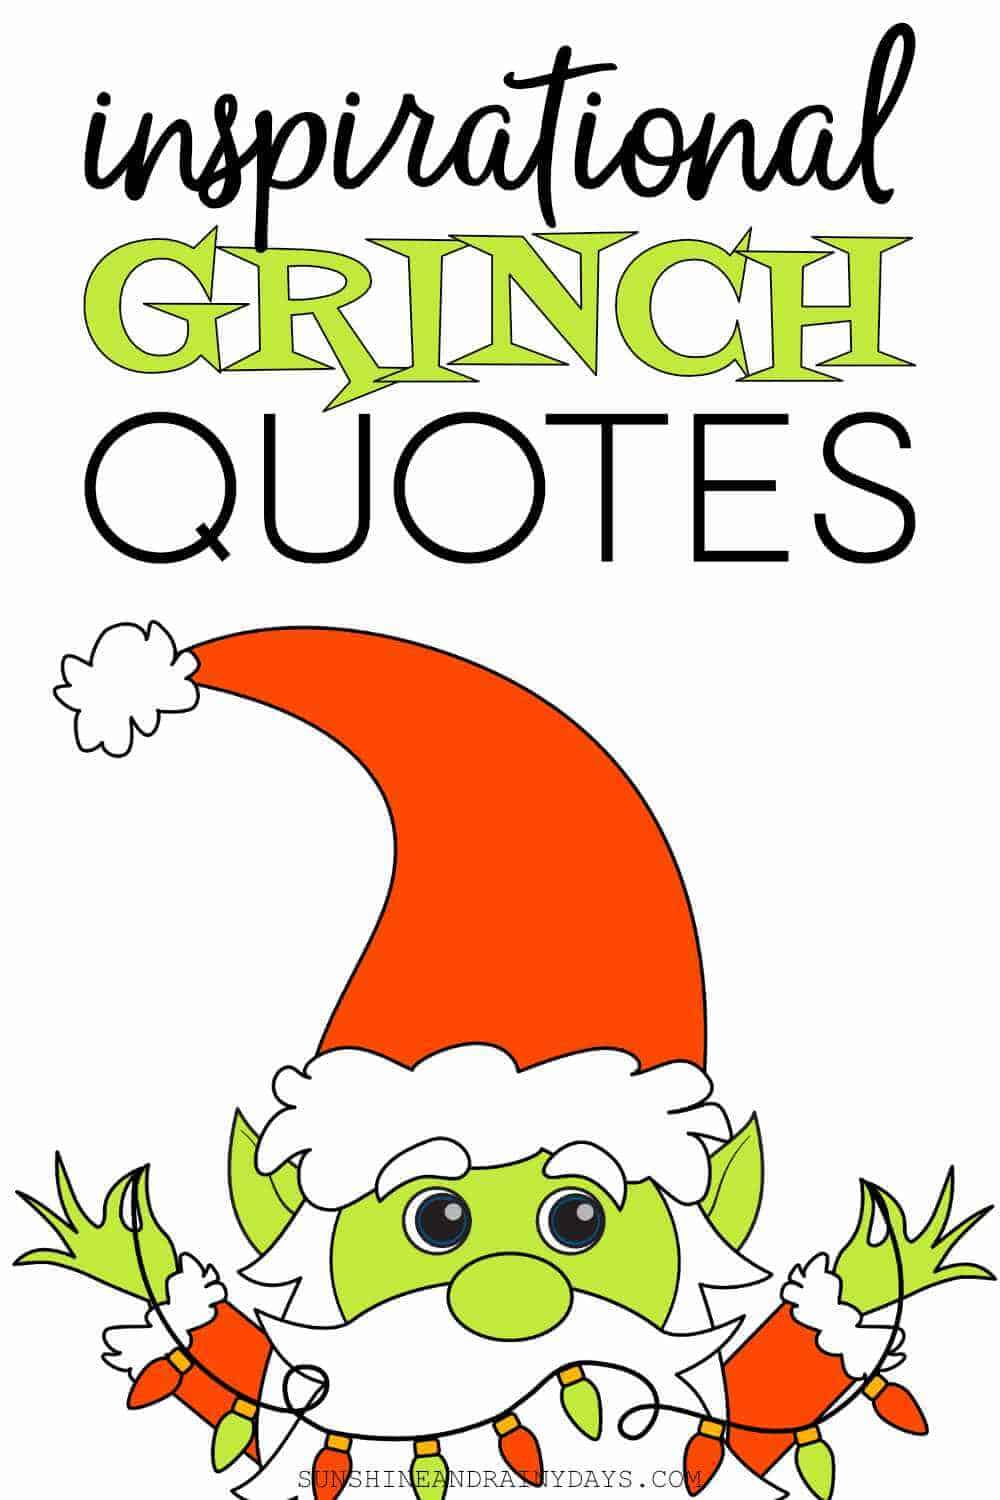 How Th Grinch Stole Christmas Famous To Do List Jazzercise Graphic